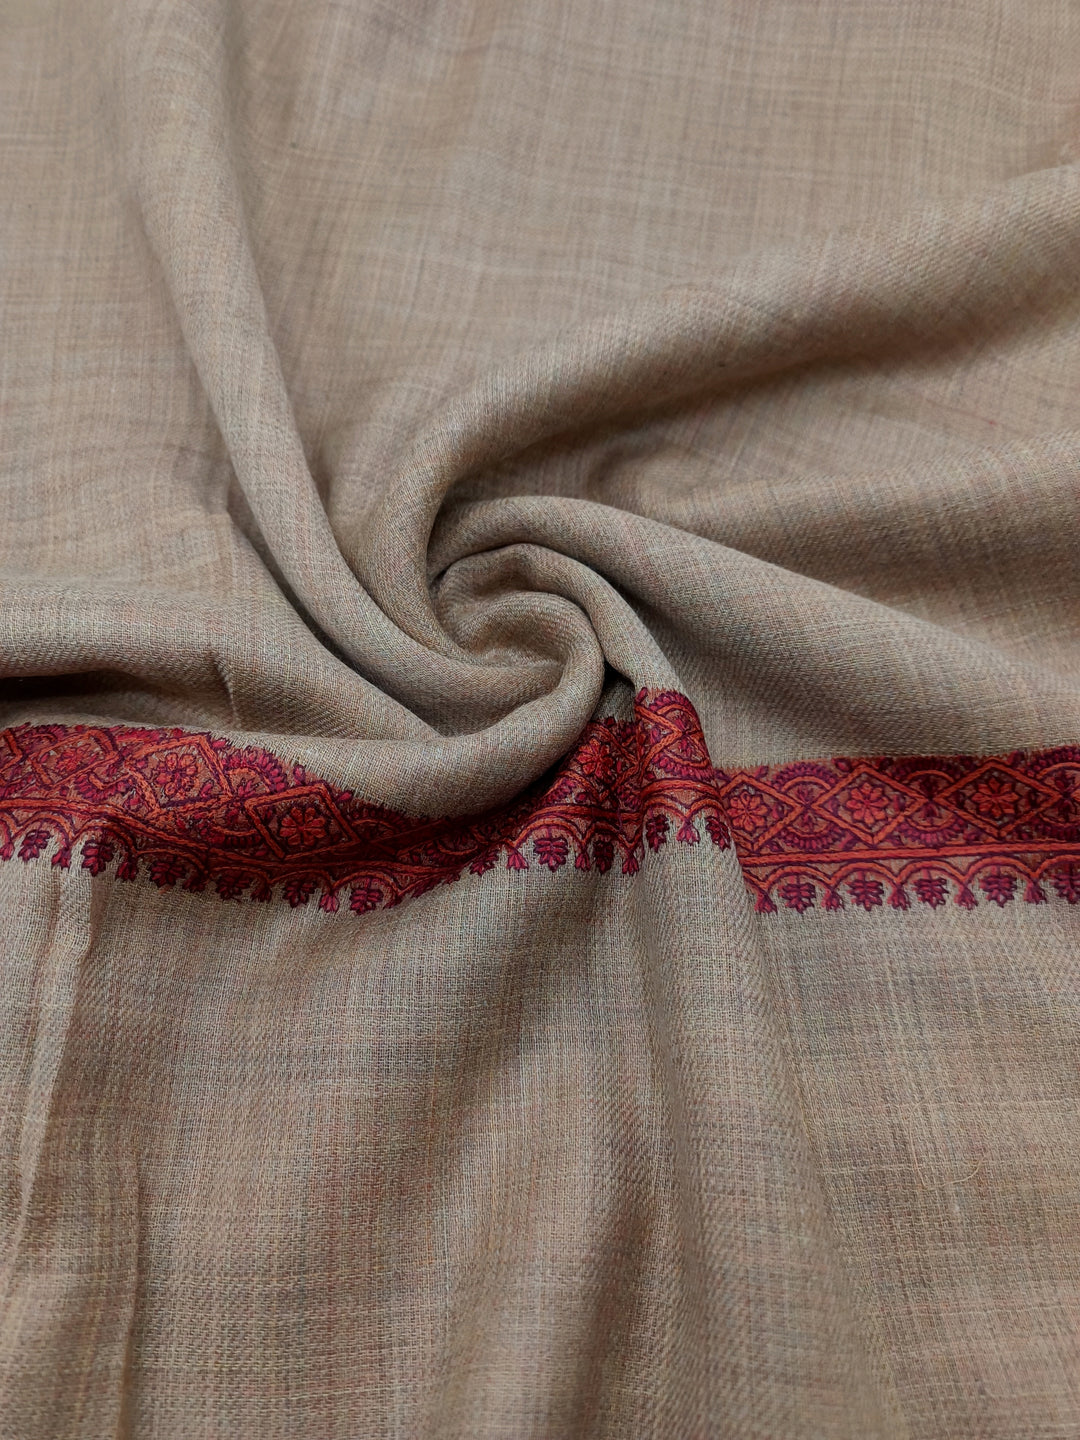 Premium Quality Brown Color Hand Embroidered Red Border Pashmina Cashmere Shawl